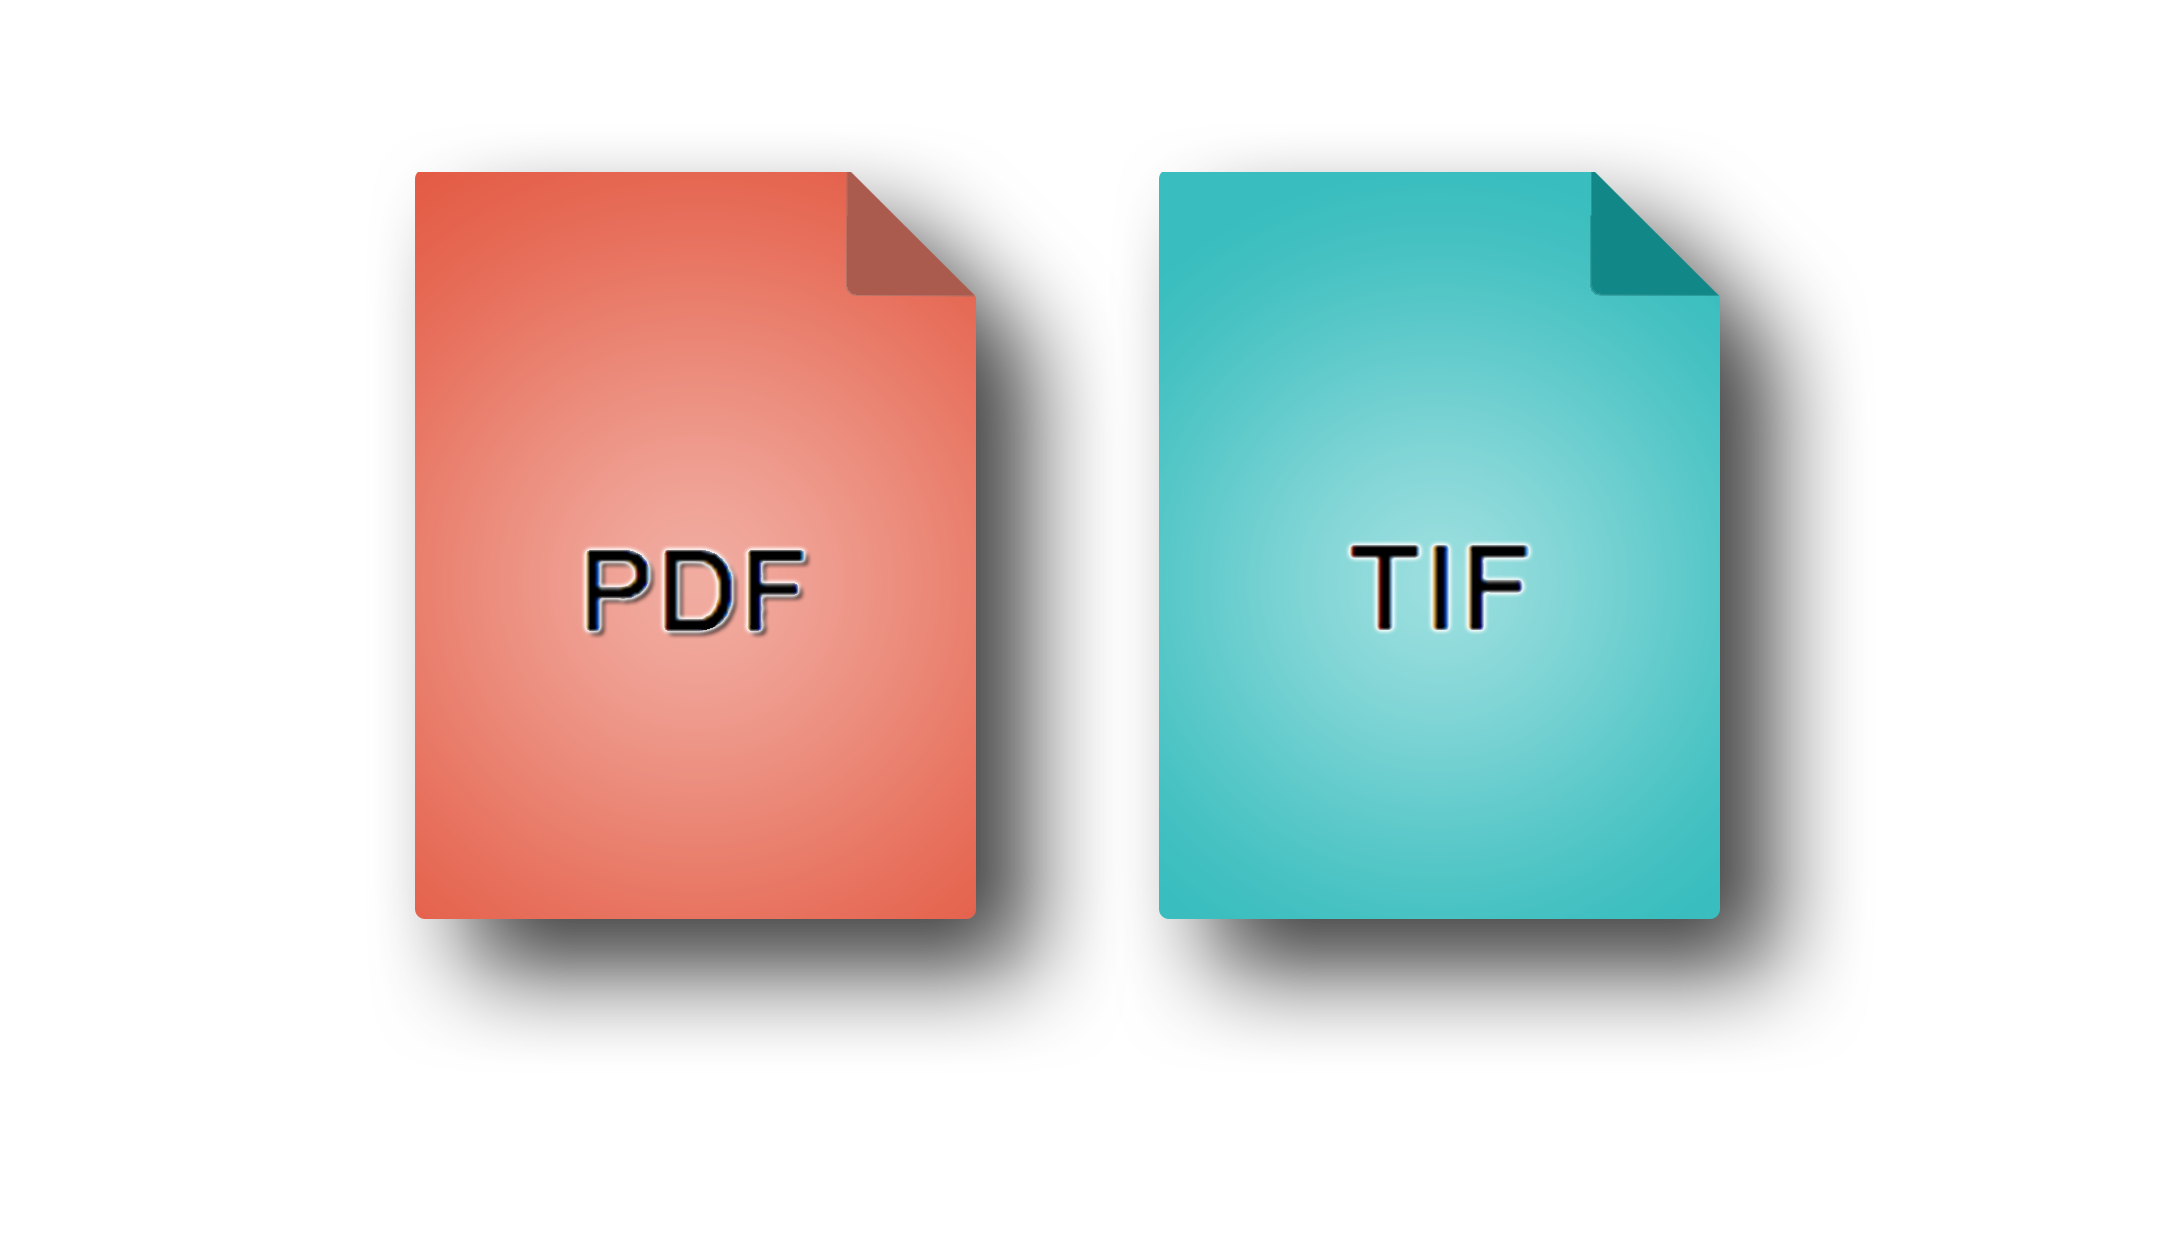 Difference Between TIFs and PDFs